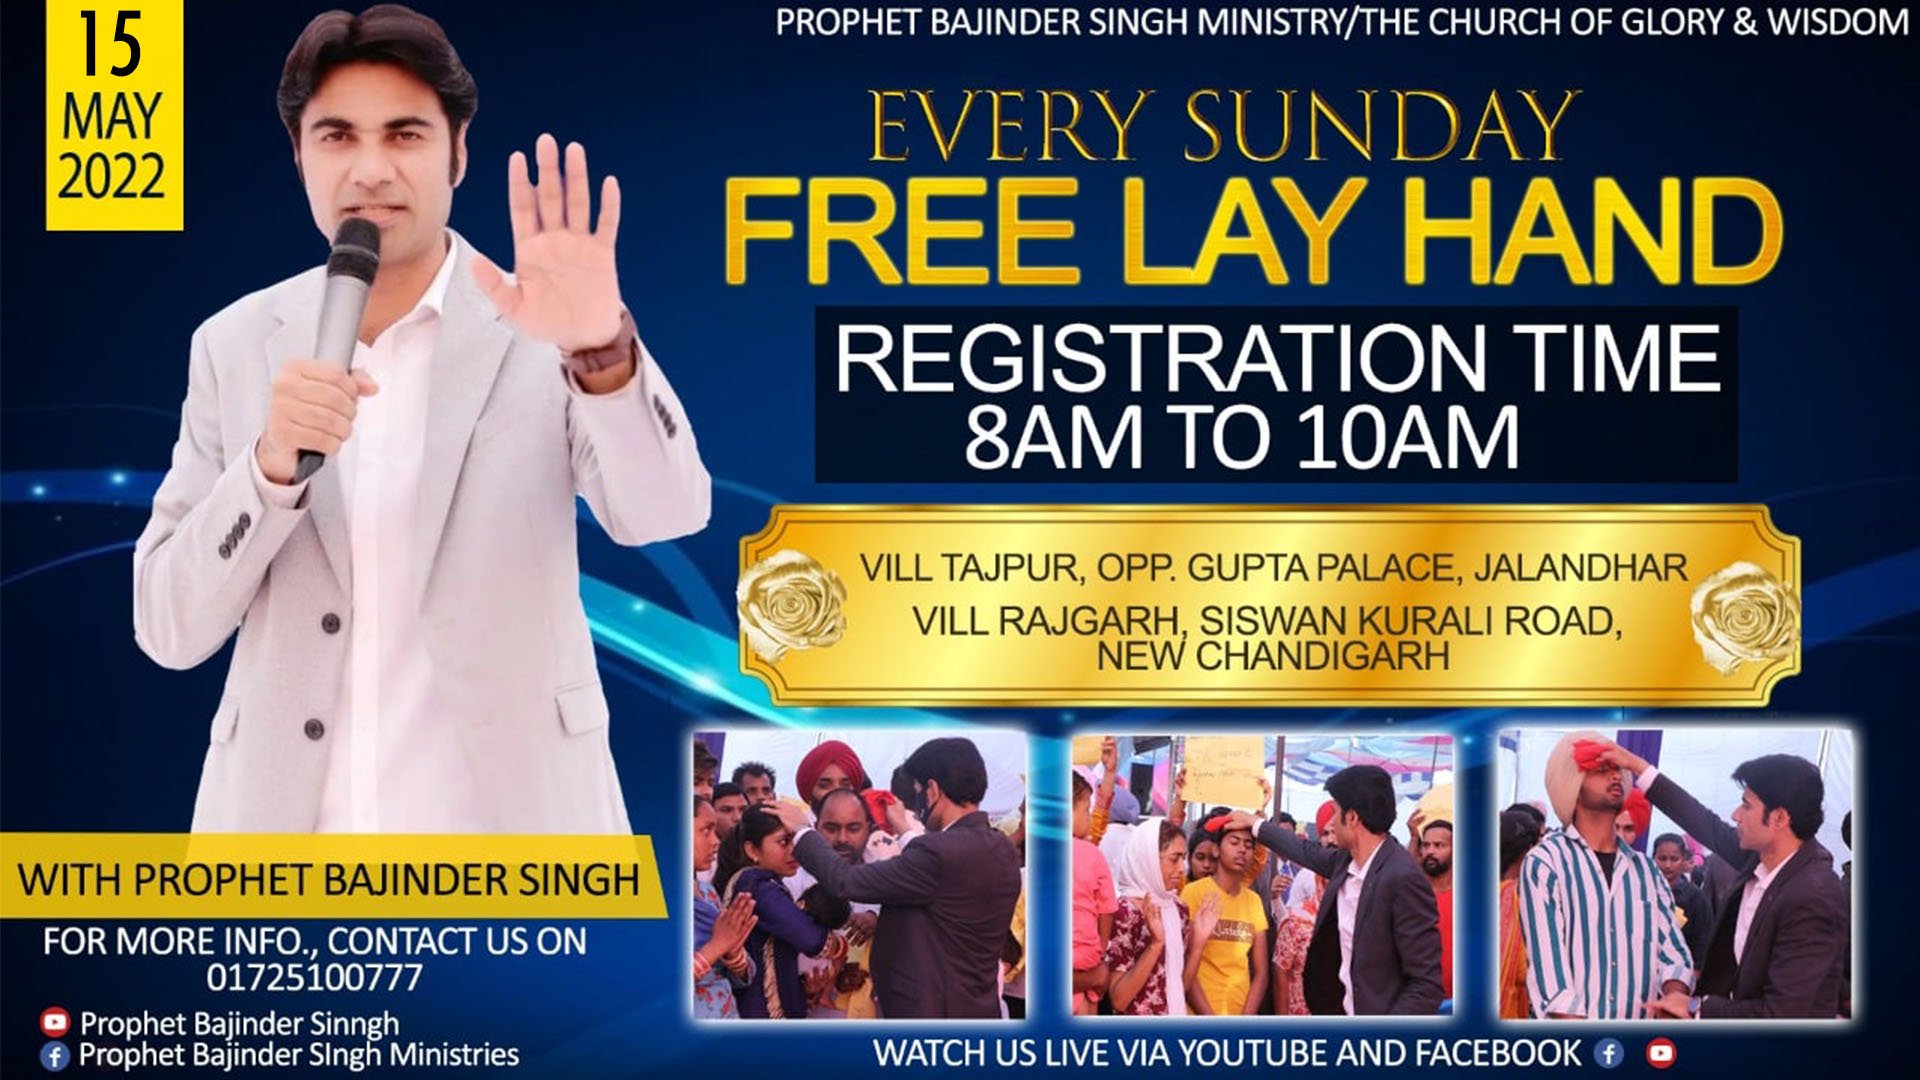 free-lay-hand-prayer-will-be-done-for-everyone-prophet-bajinder-singh-ministry-christian-blog